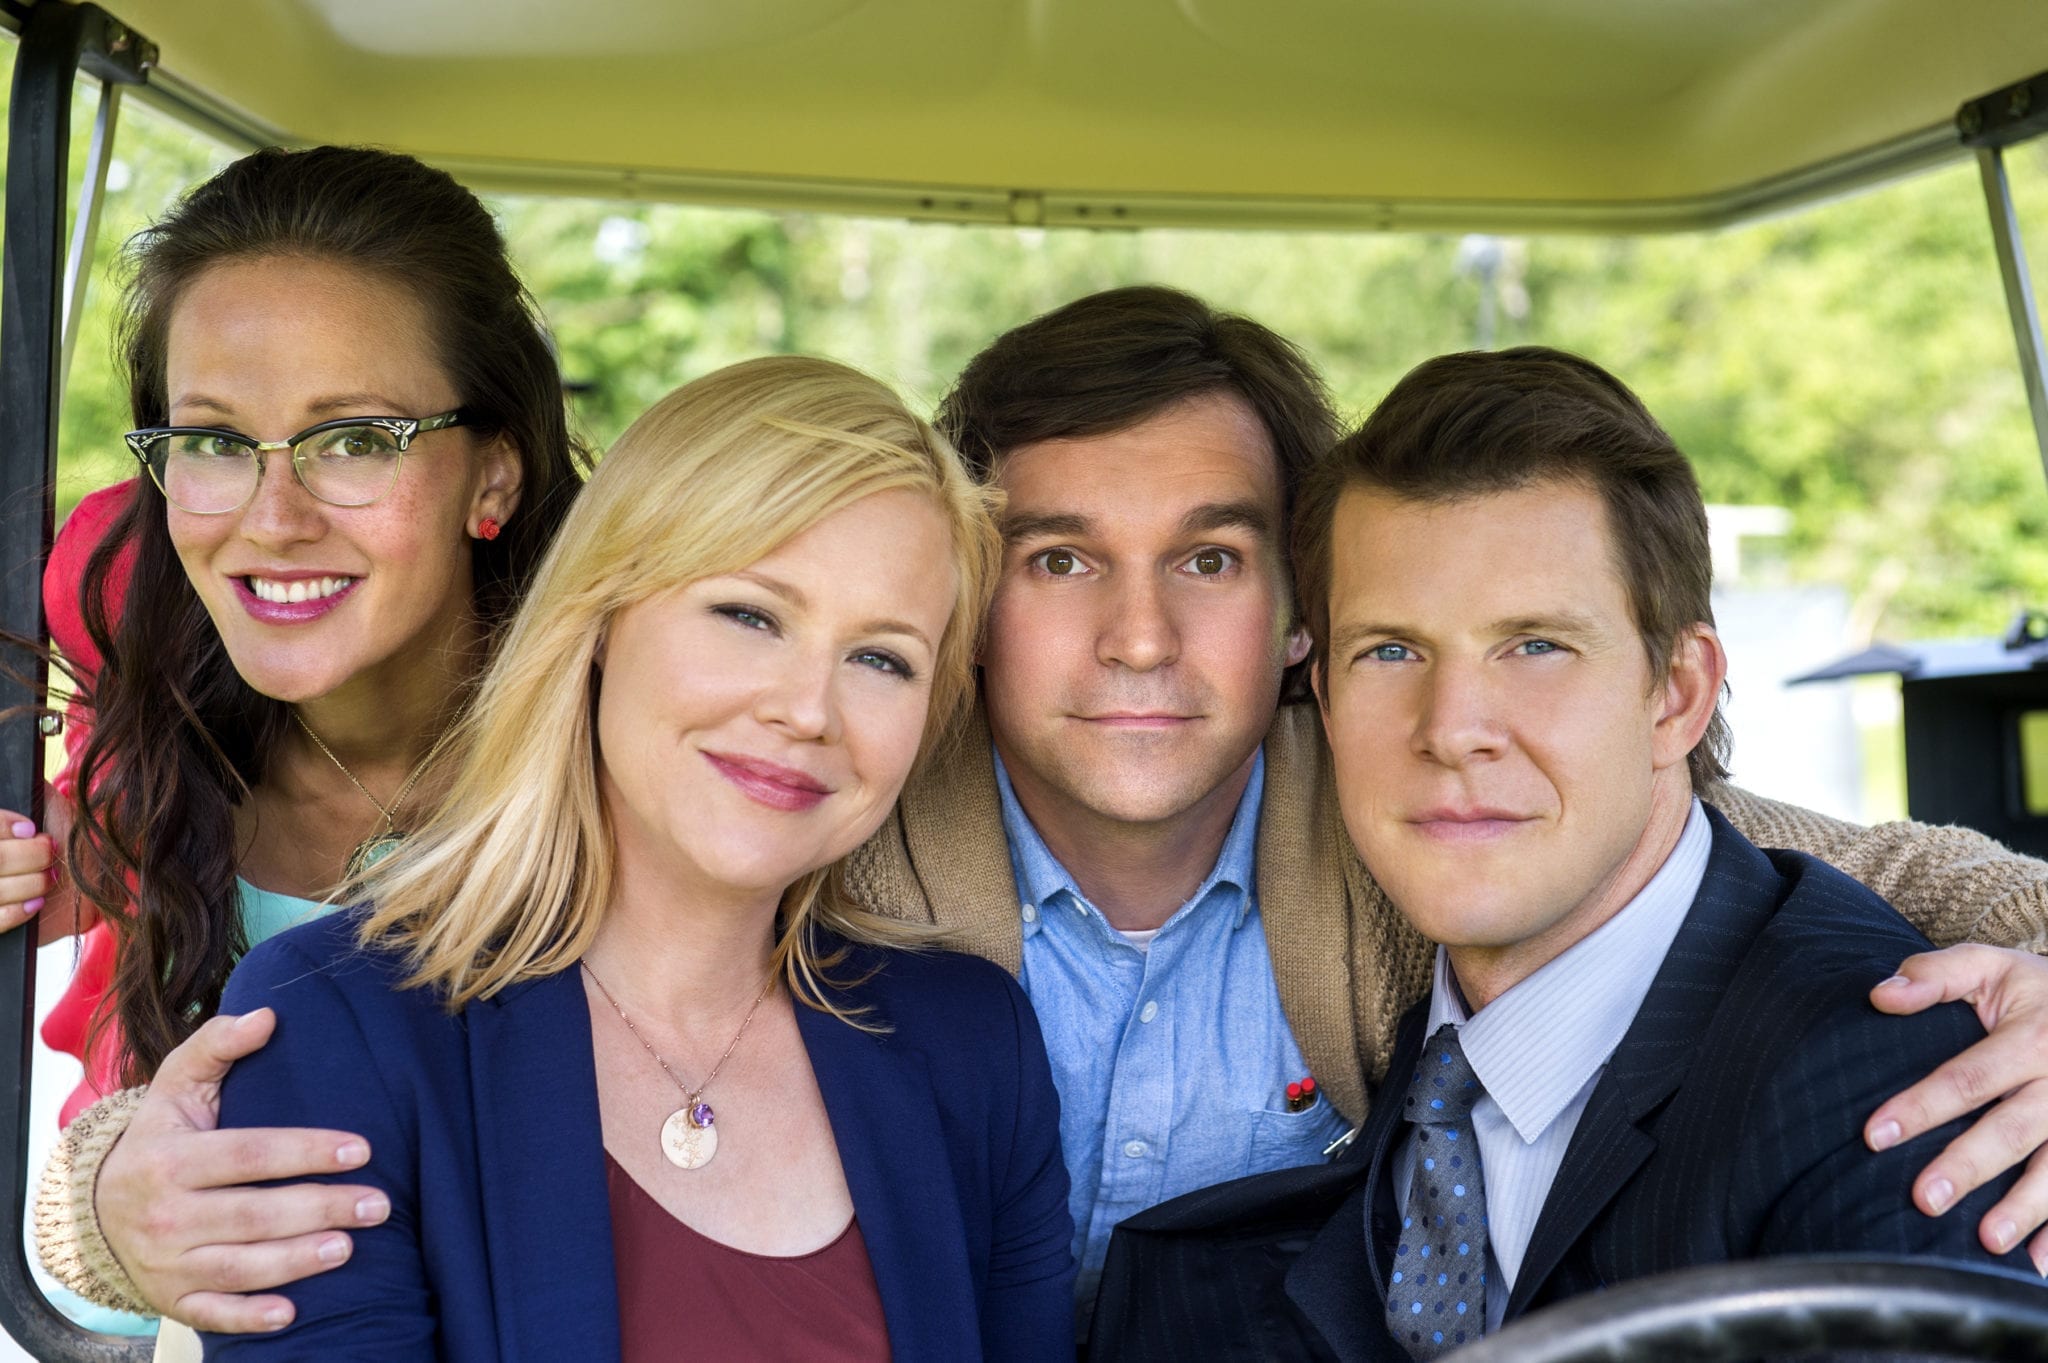 Behind the Scenes Cast Photos of Signed, Sealed, Delivered